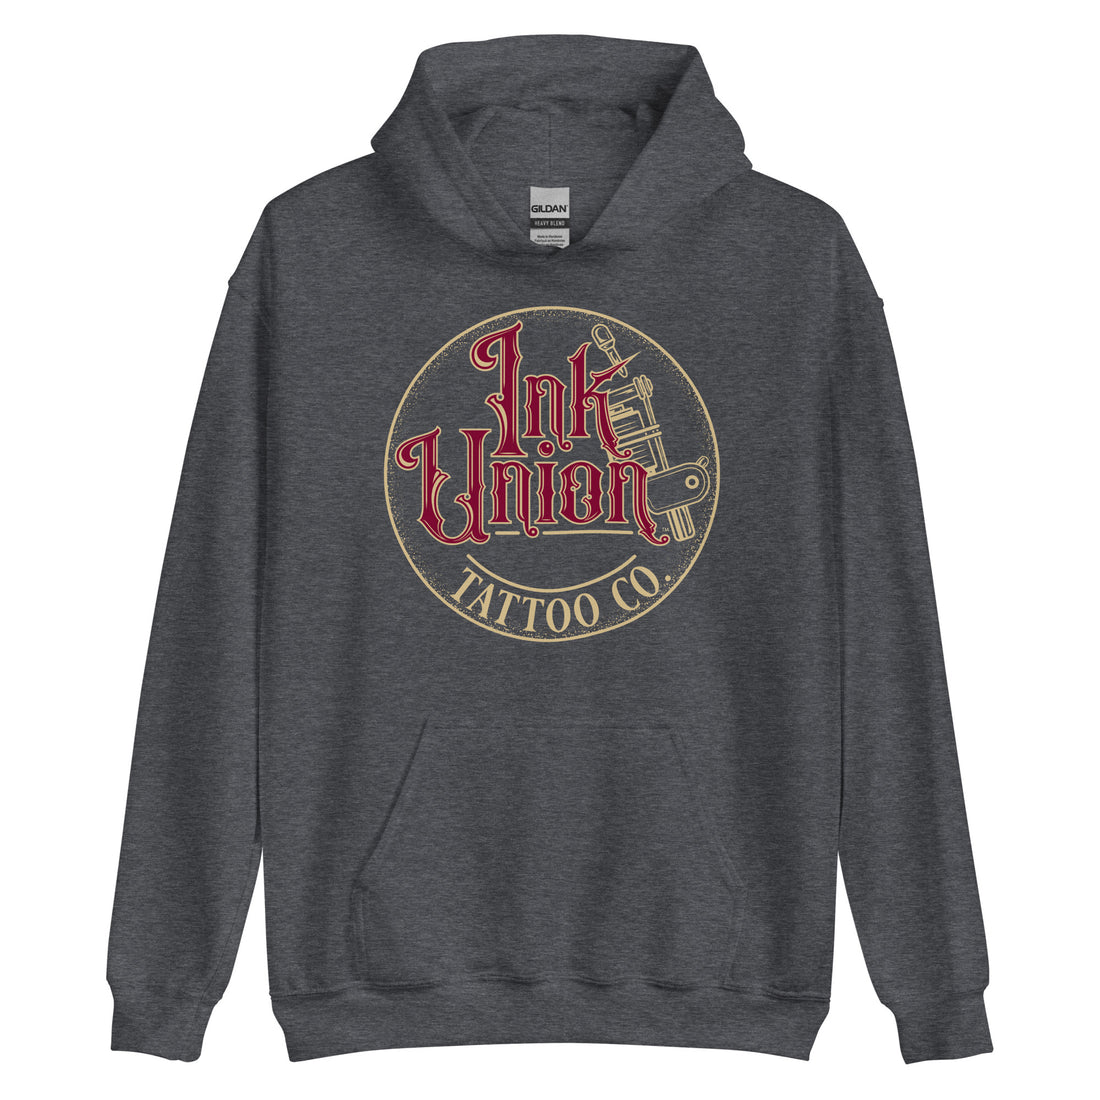 A dark grey hoodie with a gold circle containing fancy lettering in red and gold that says Ink Union and a gold tattoo machine peeking out from behind on the right side.  There is a dot work gradient inside the circle, and the words Tattoo Co. in gold are at the bottom of the design.